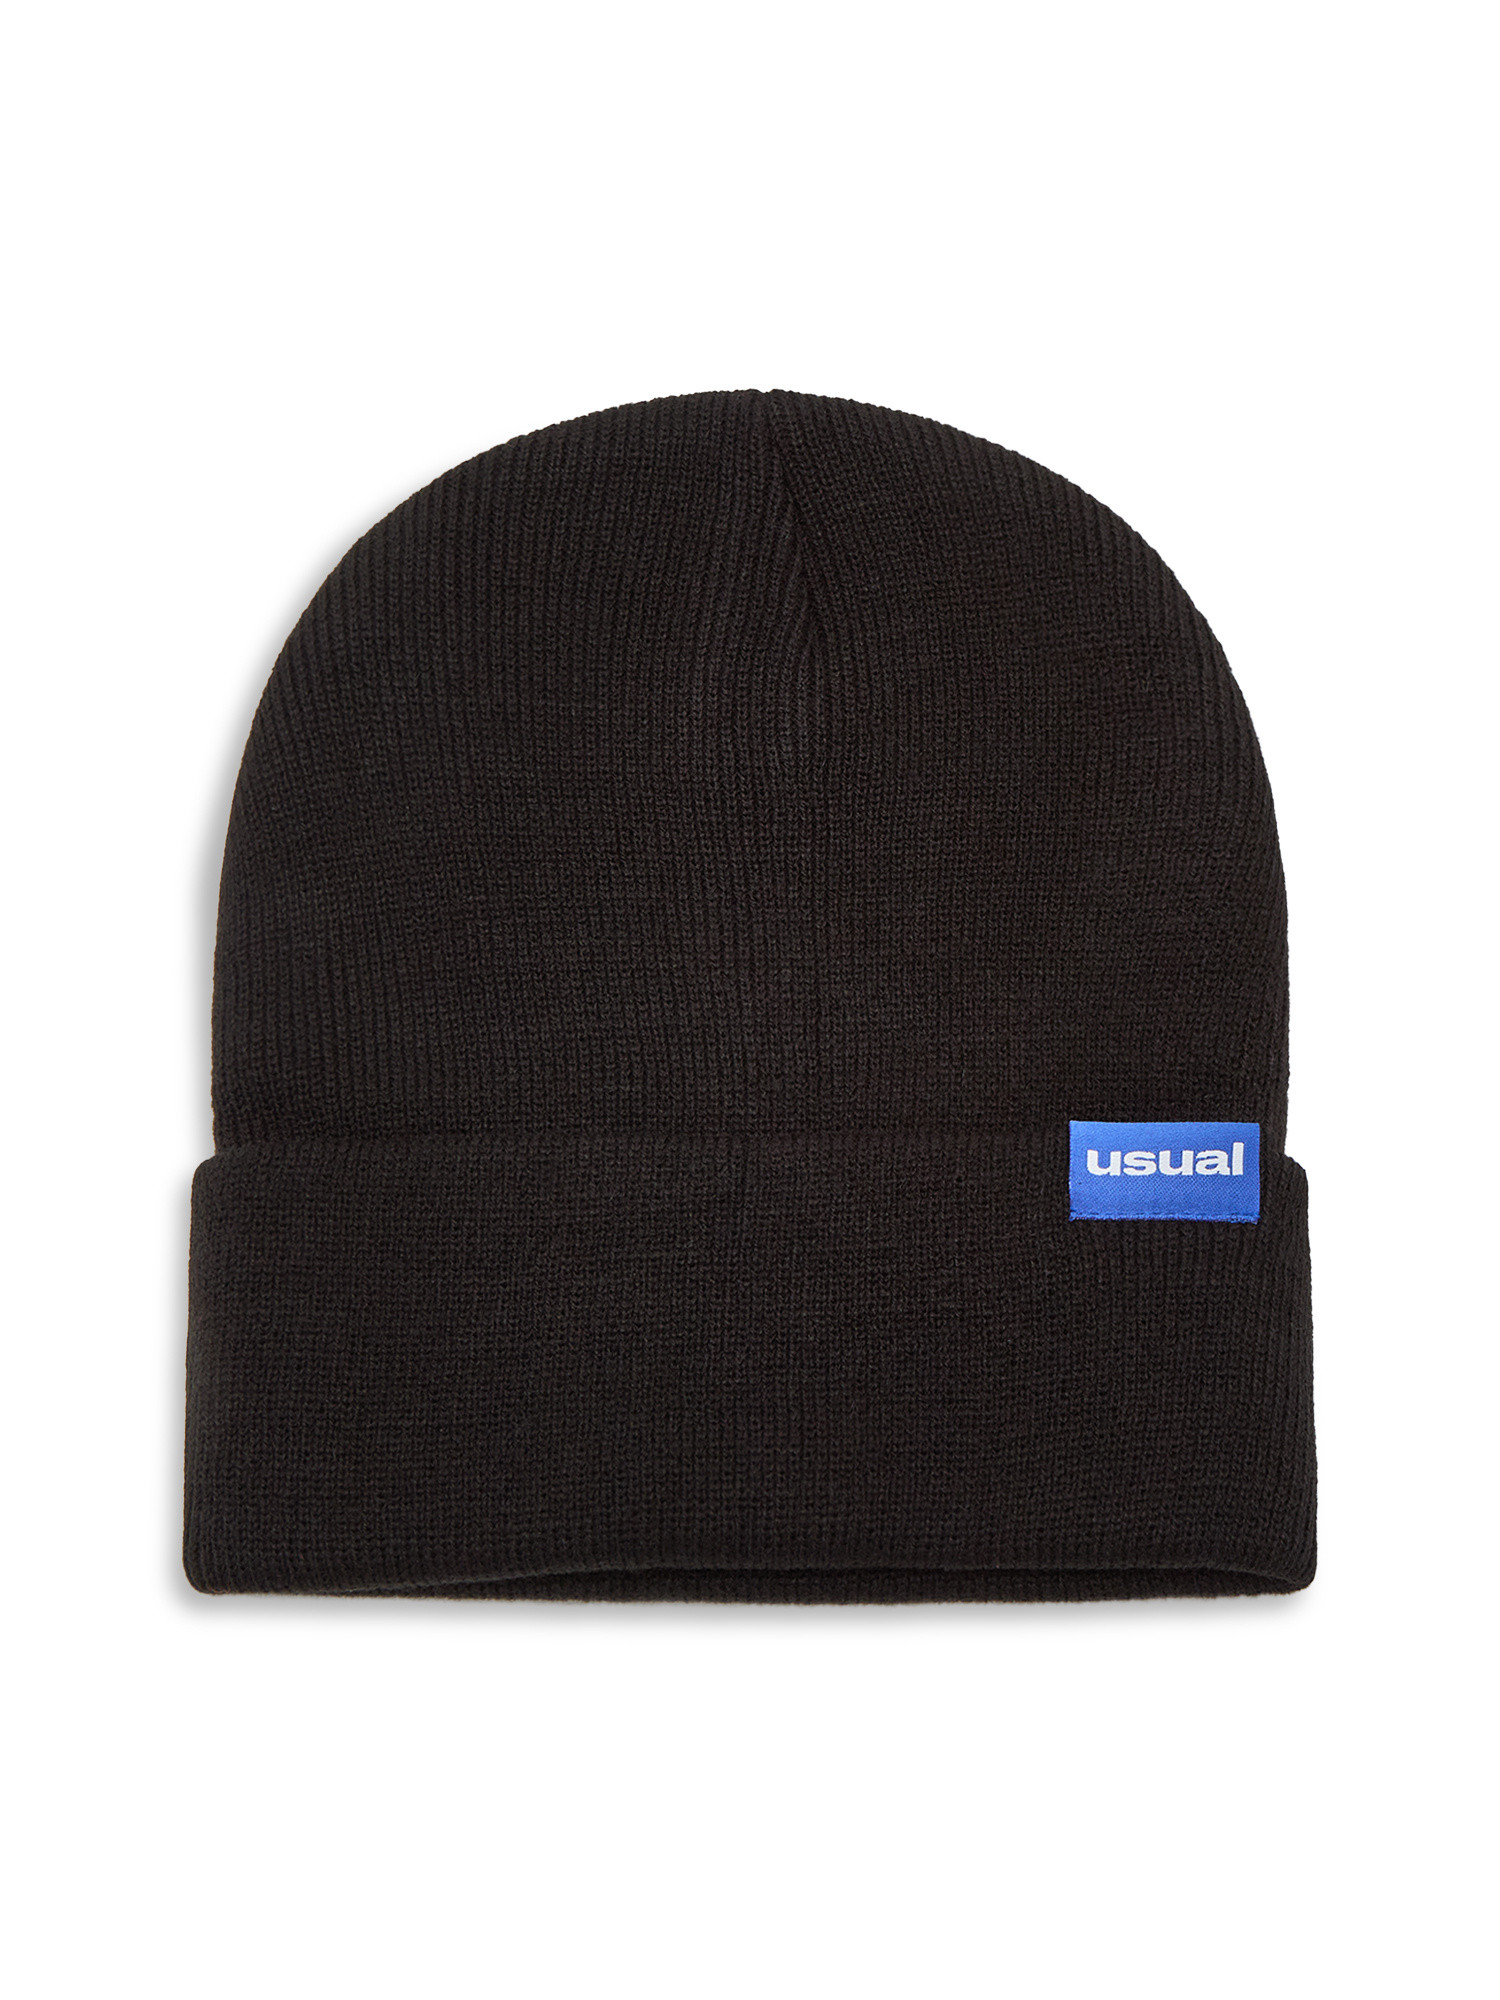 Usual - Cappellino Beanie Flag, Nero, large image number 0